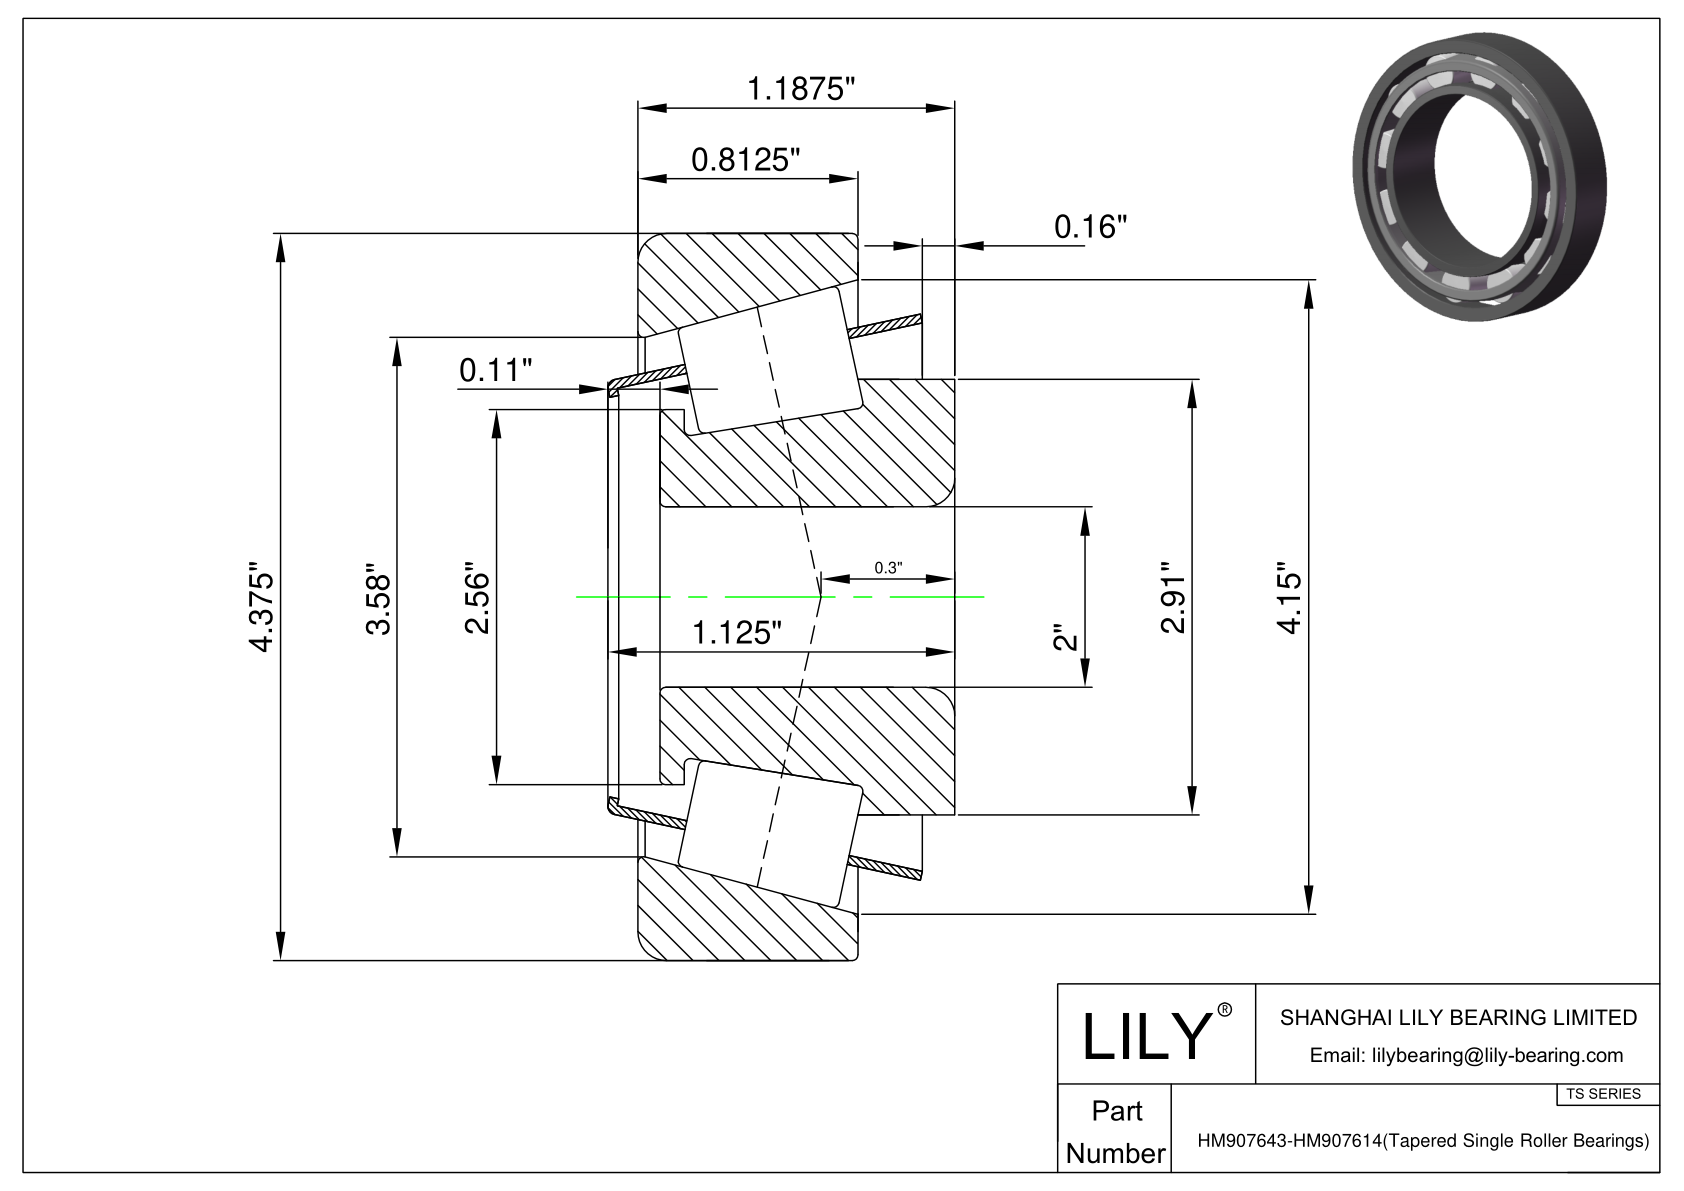 HM907643-HM907614 TS (Tapered Single Roller Bearings) (Imperial) cad drawing